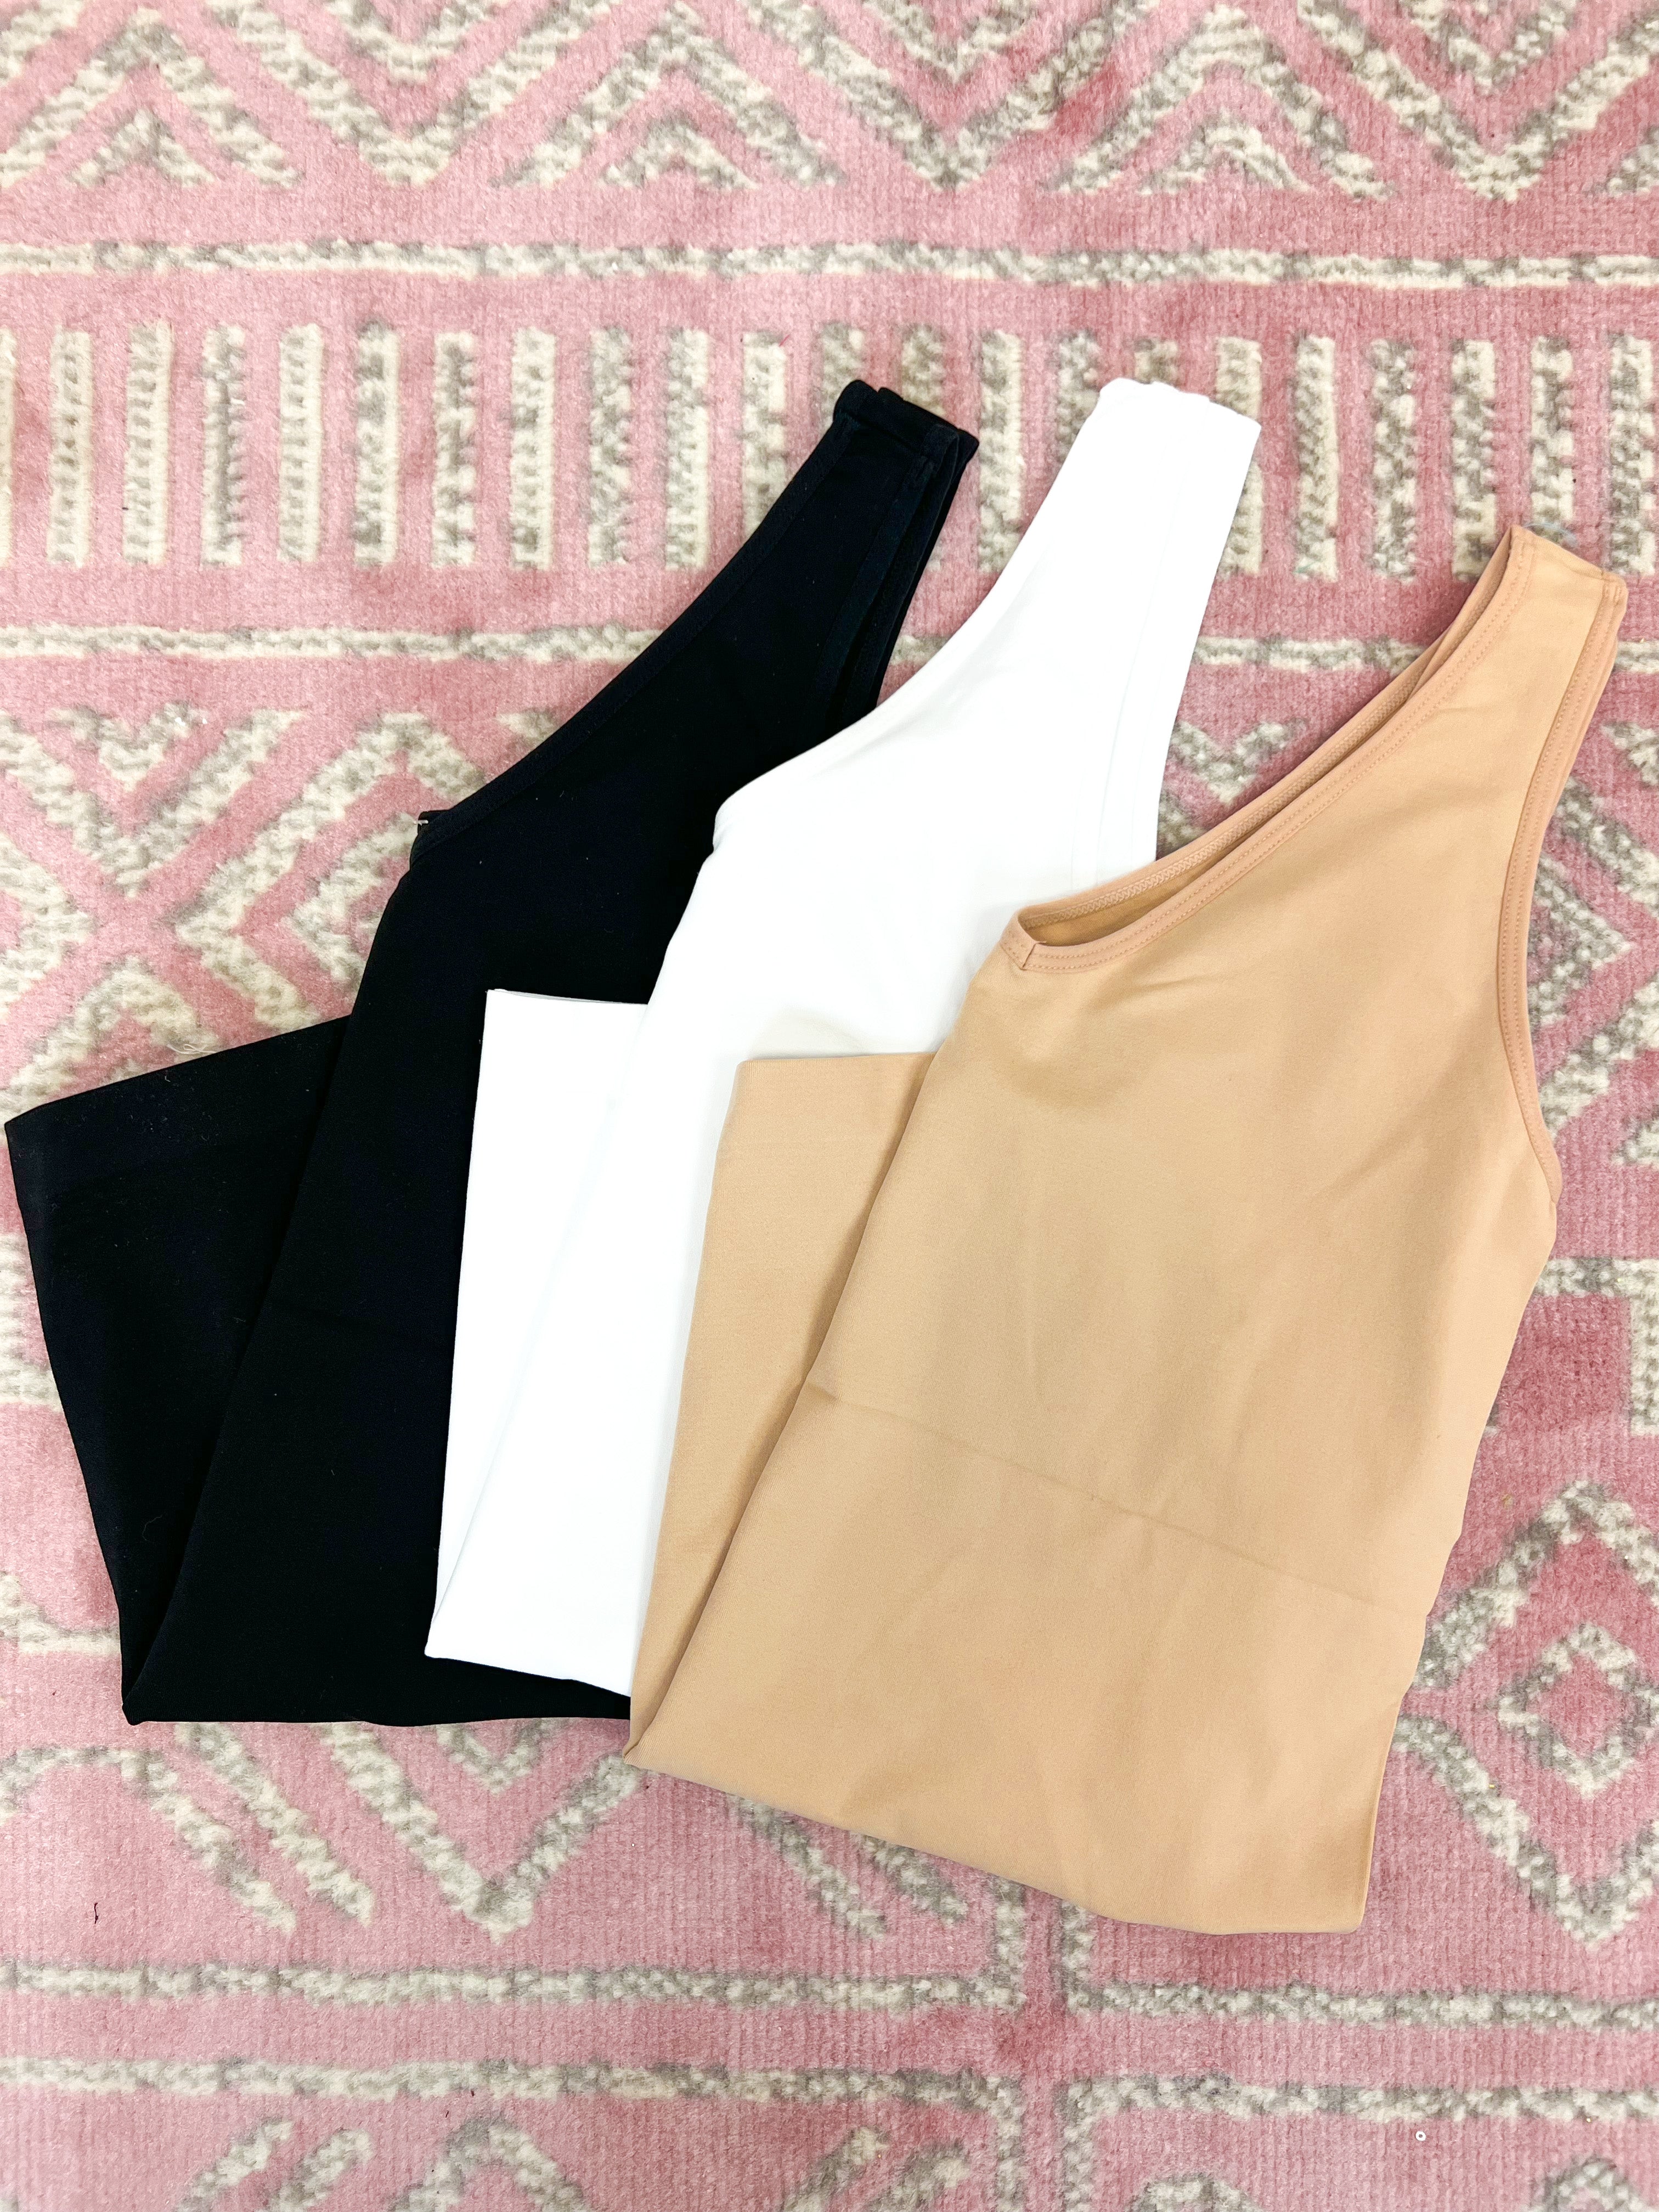 Reversible Tank-Tank Tops-The Lovely Closet-The Lovely Closet, Women's Fashion Boutique in Alexandria, KY